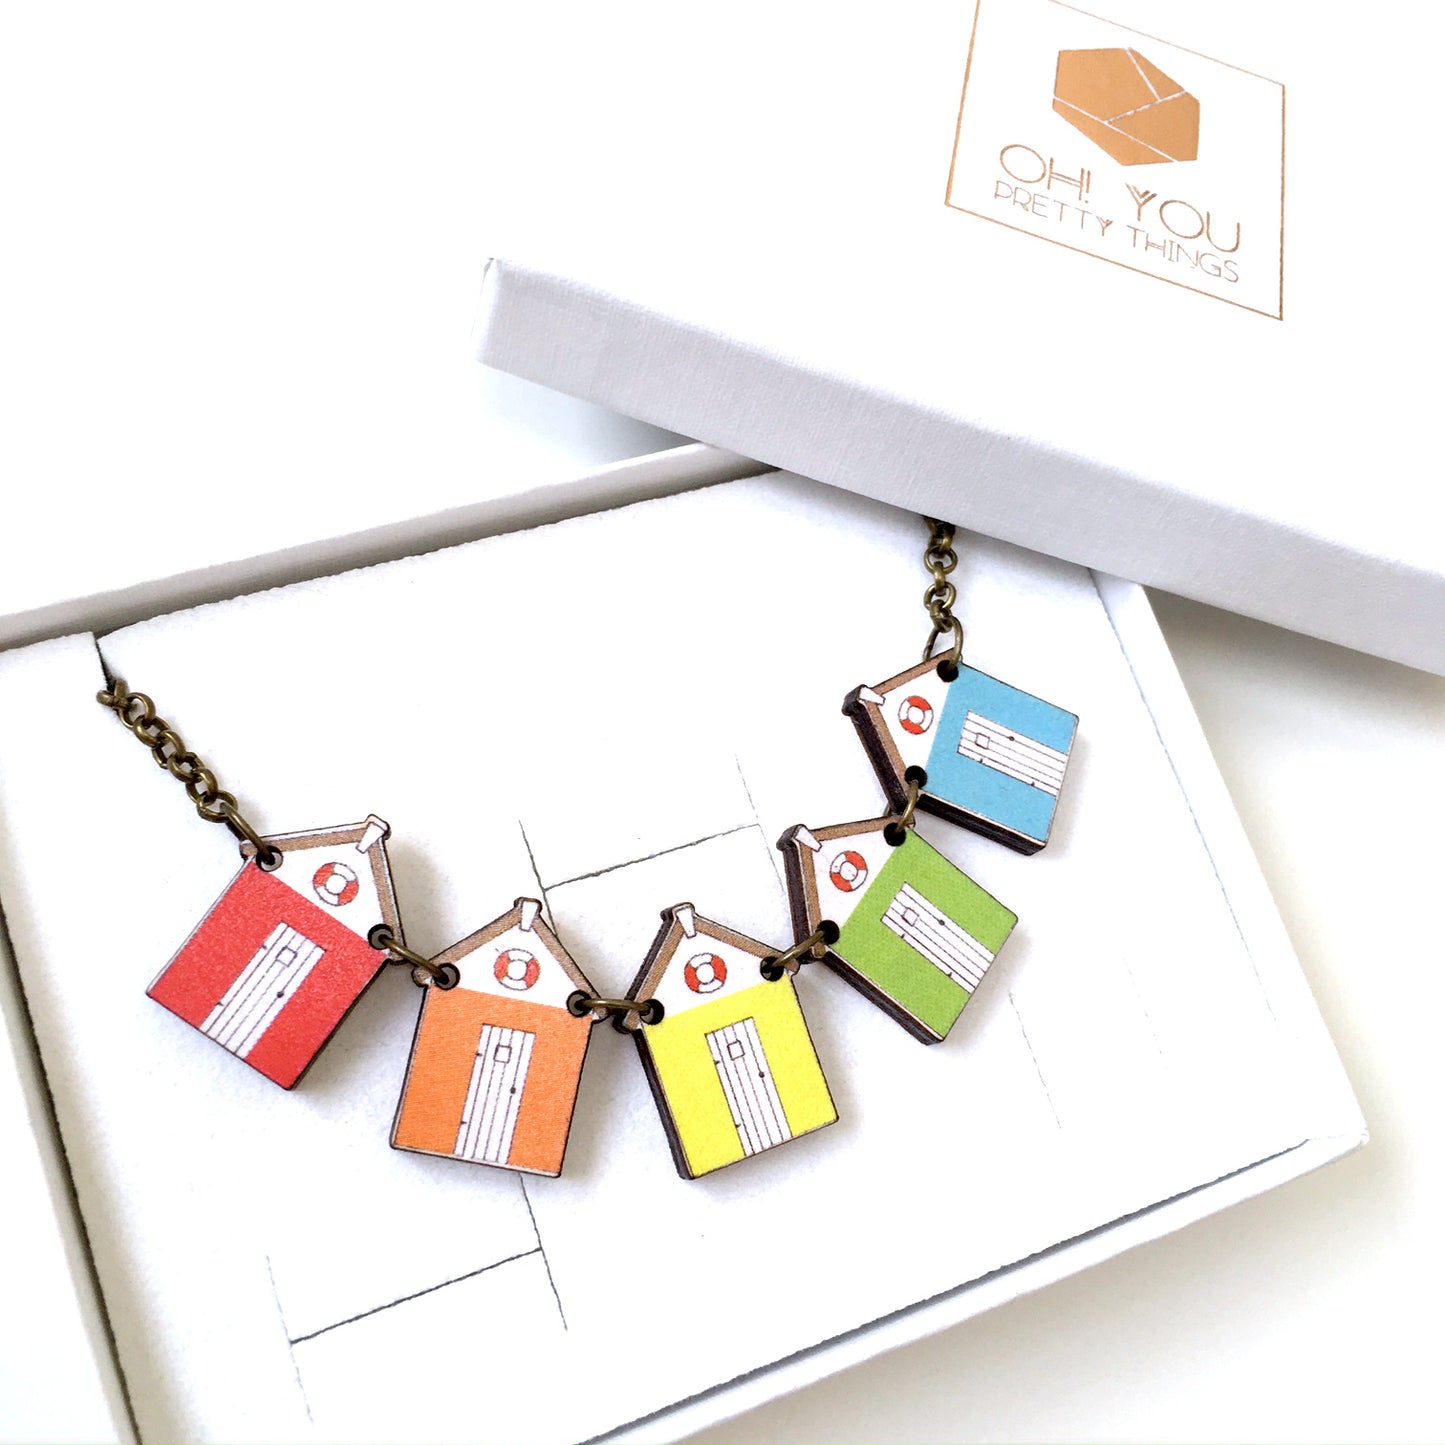 Bright beach hut necklace - Summer gift for her